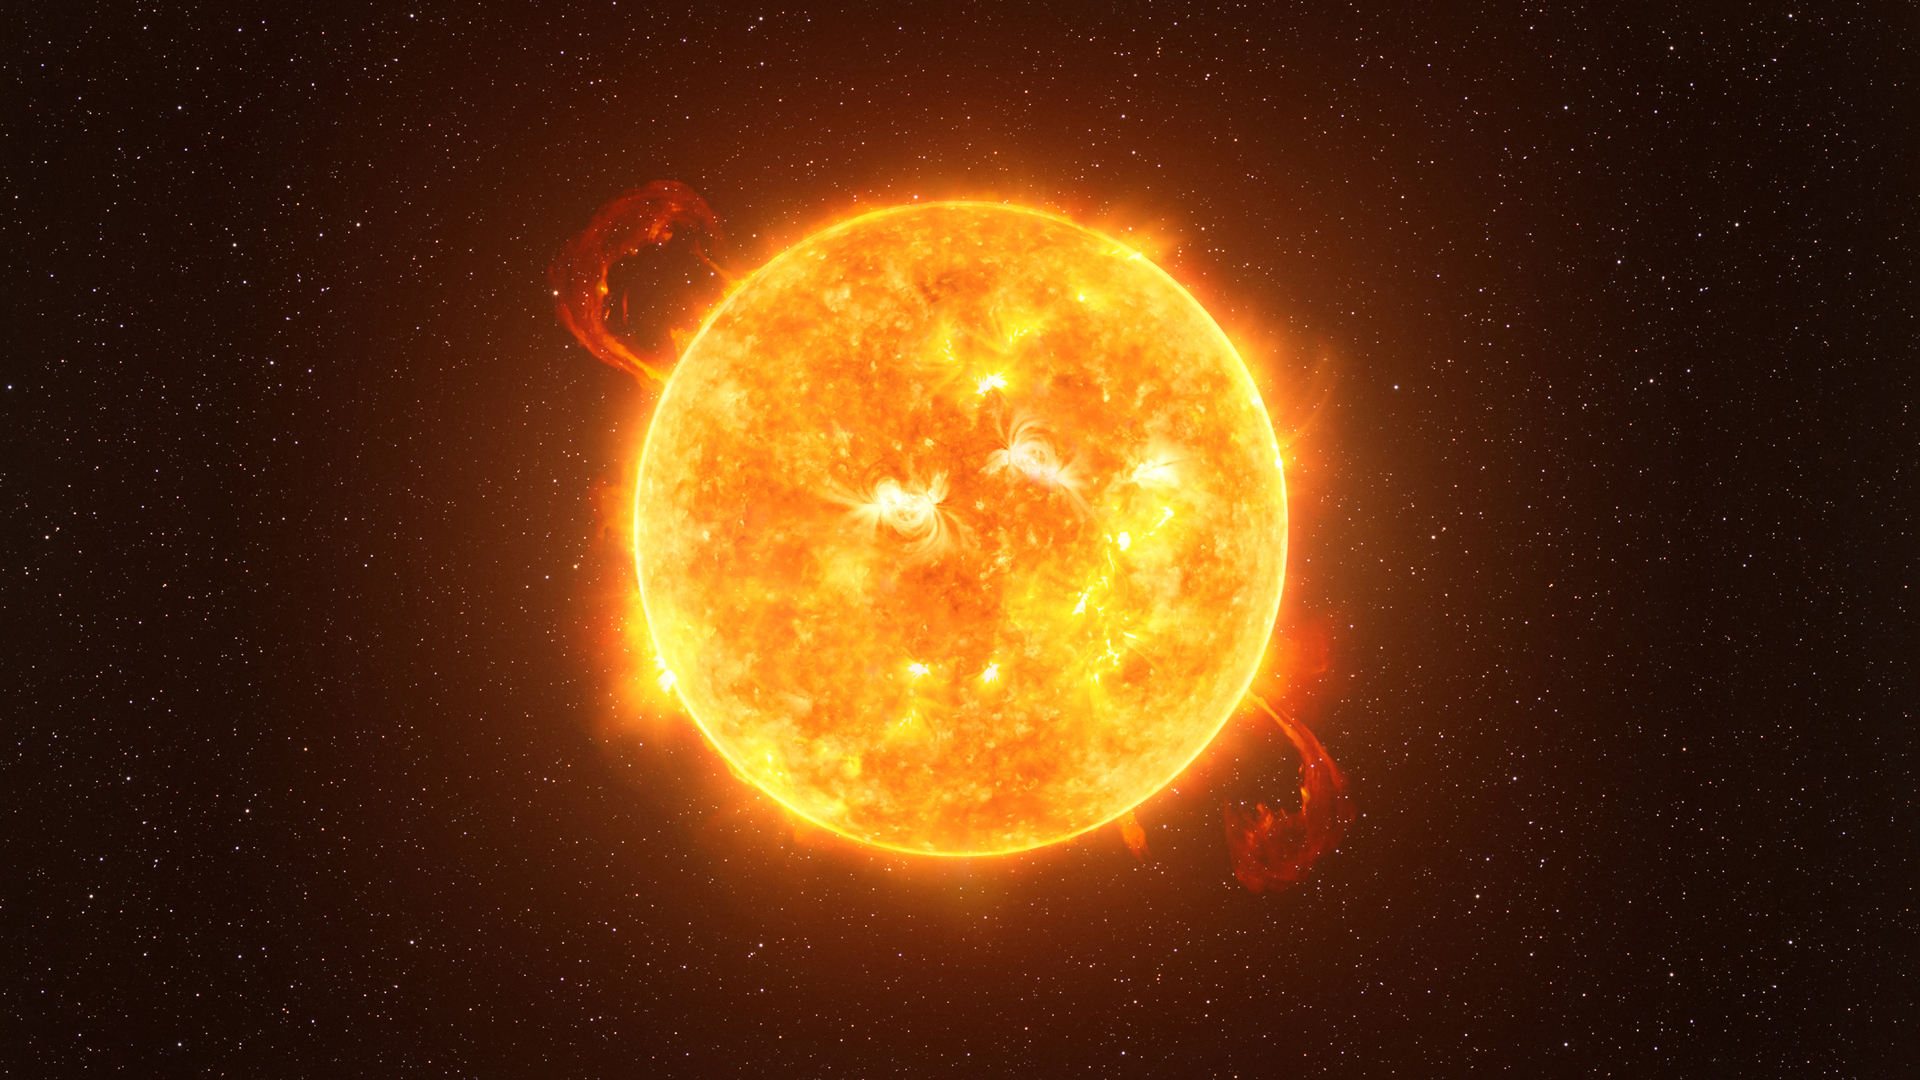 Solving the mysterious dimming of the Betelgeuse star